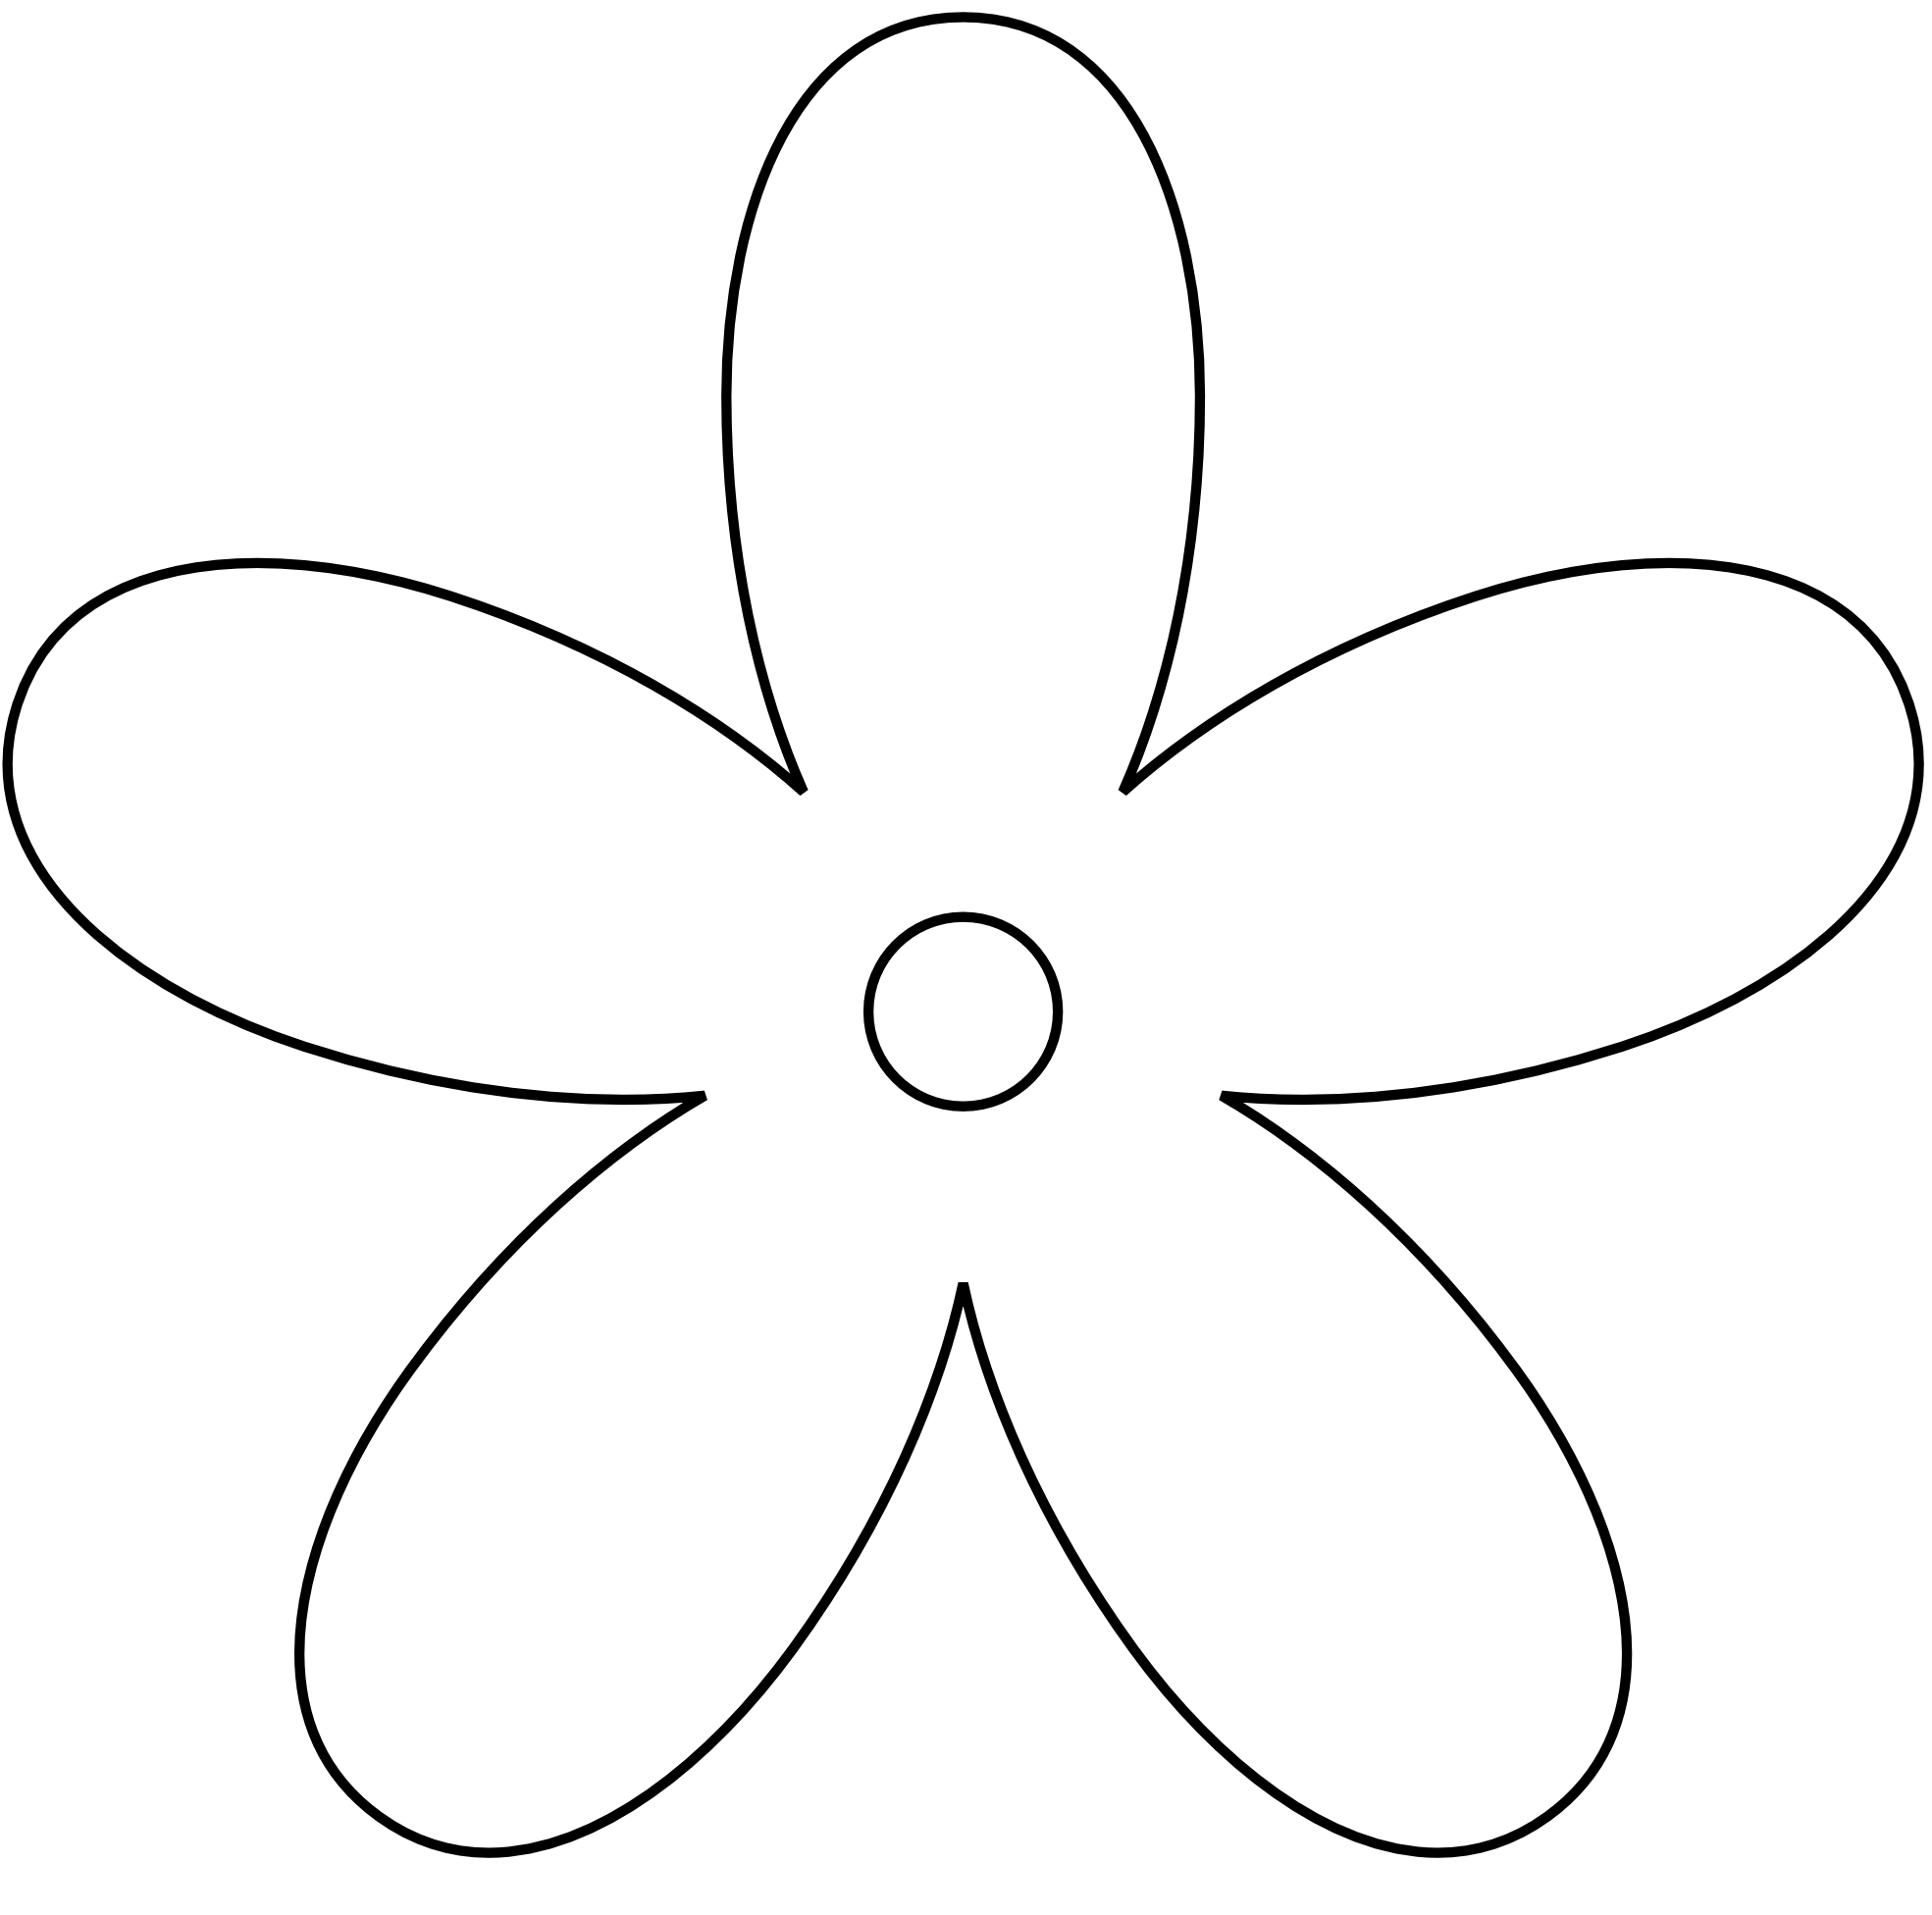 Flowers For > Flowers Clip Art Black And White